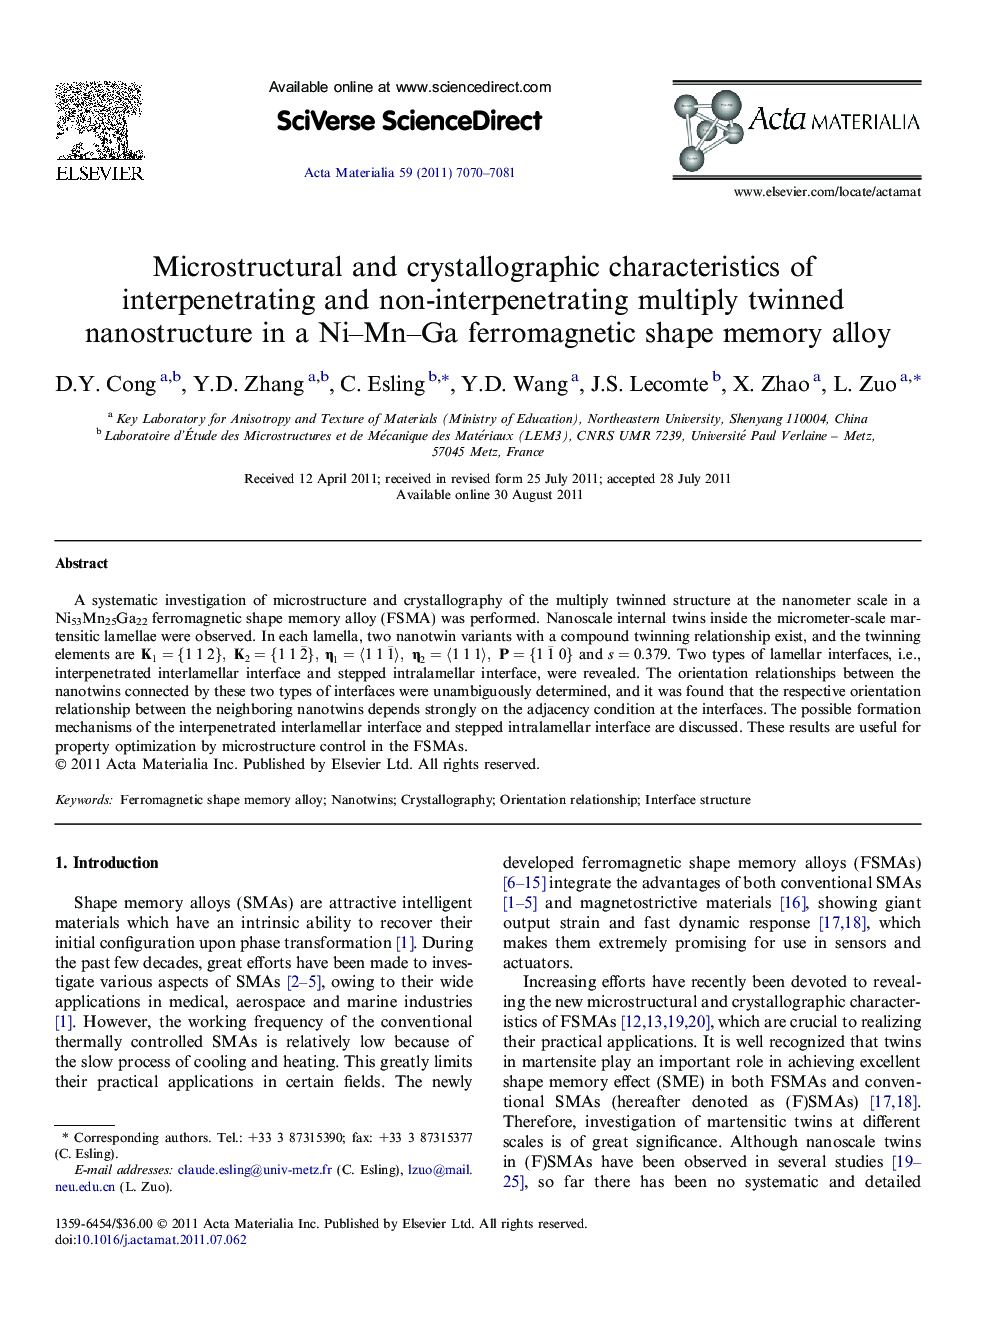 Microstructural and crystallographic characteristics of interpenetrating and non-interpenetrating multiply twinned nanostructure in a Ni–Mn–Ga ferromagnetic shape memory alloy